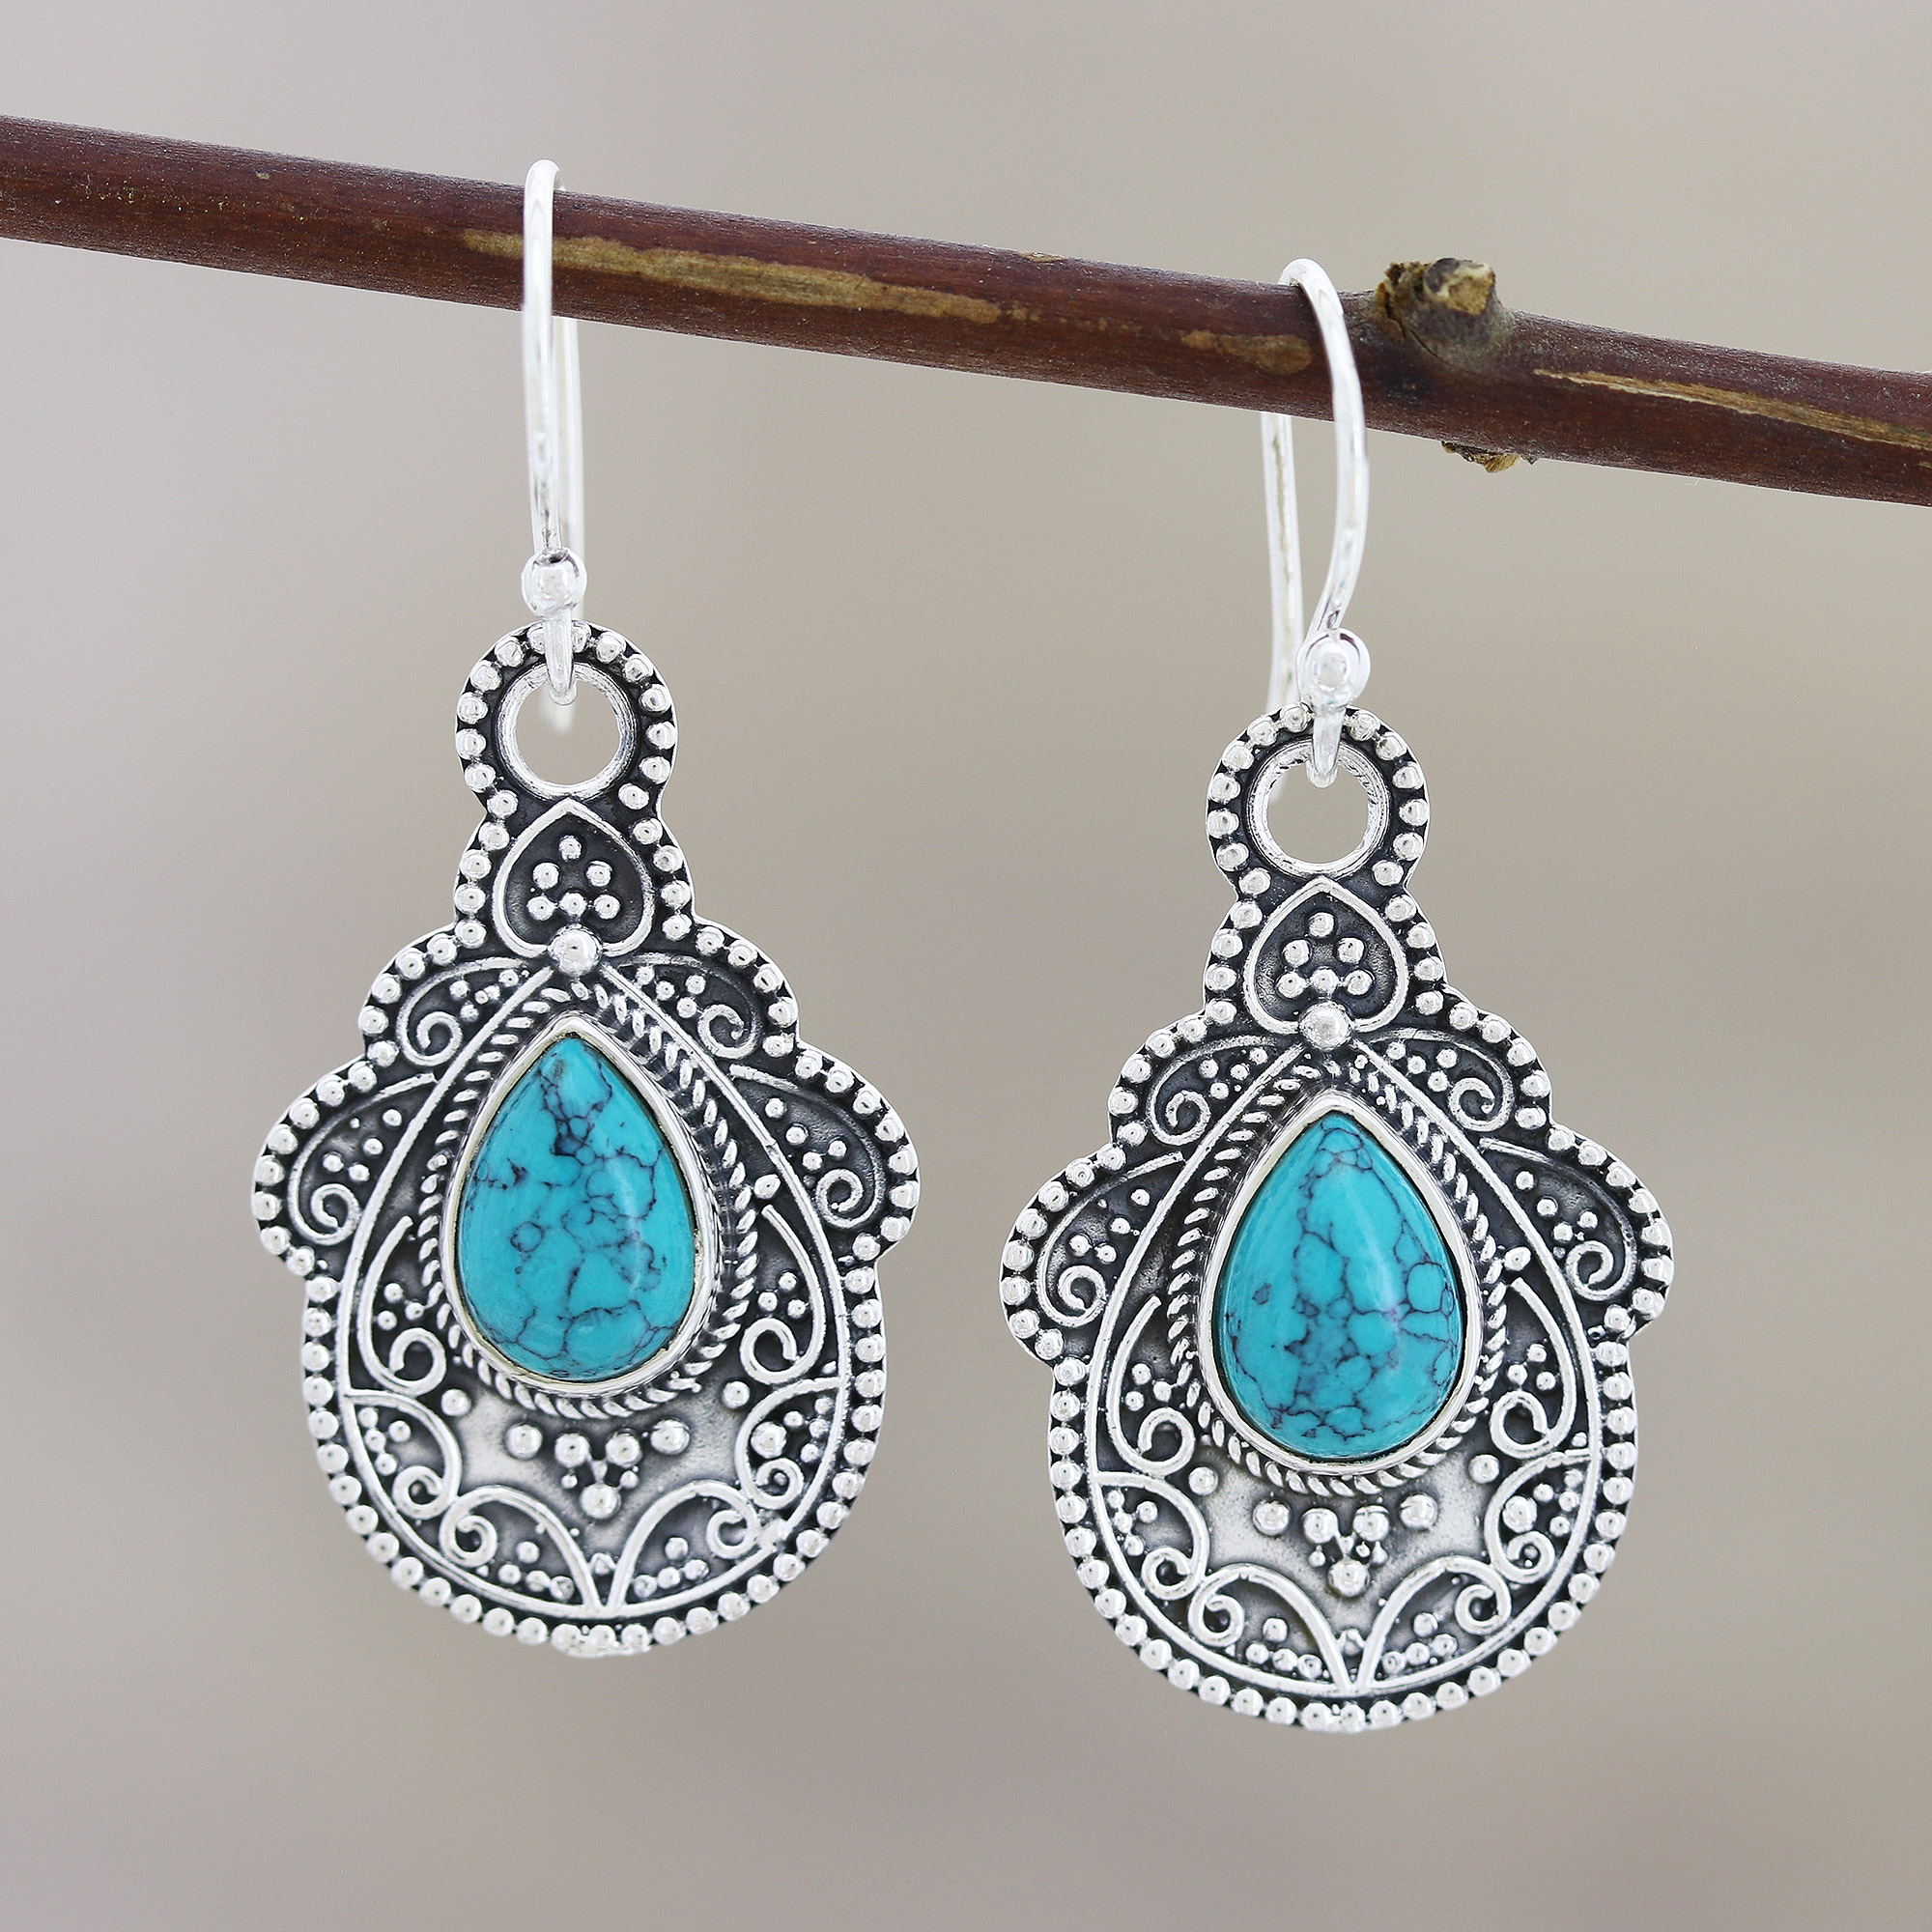 Oxidized Silver and Reconstituted Turquoise Earrings - Agra Aesthetic ...